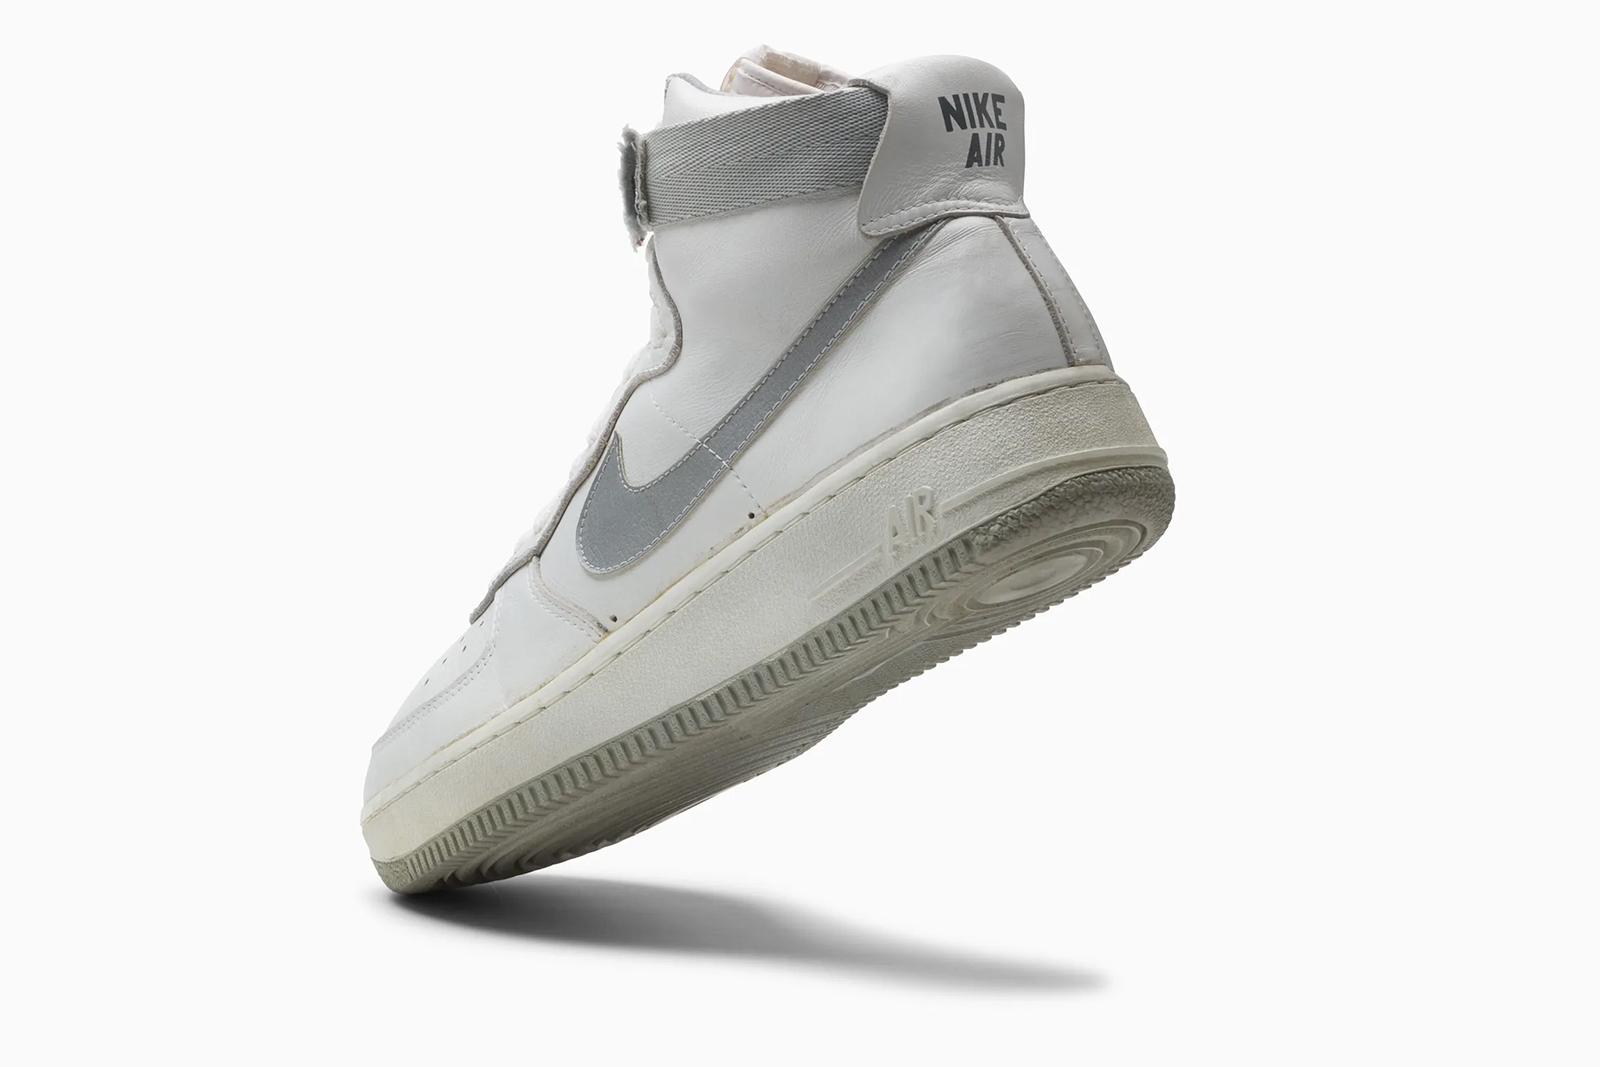 The Off-White x Nike Air Force 1 Mid 'Sheed' is one for OG NBA fans